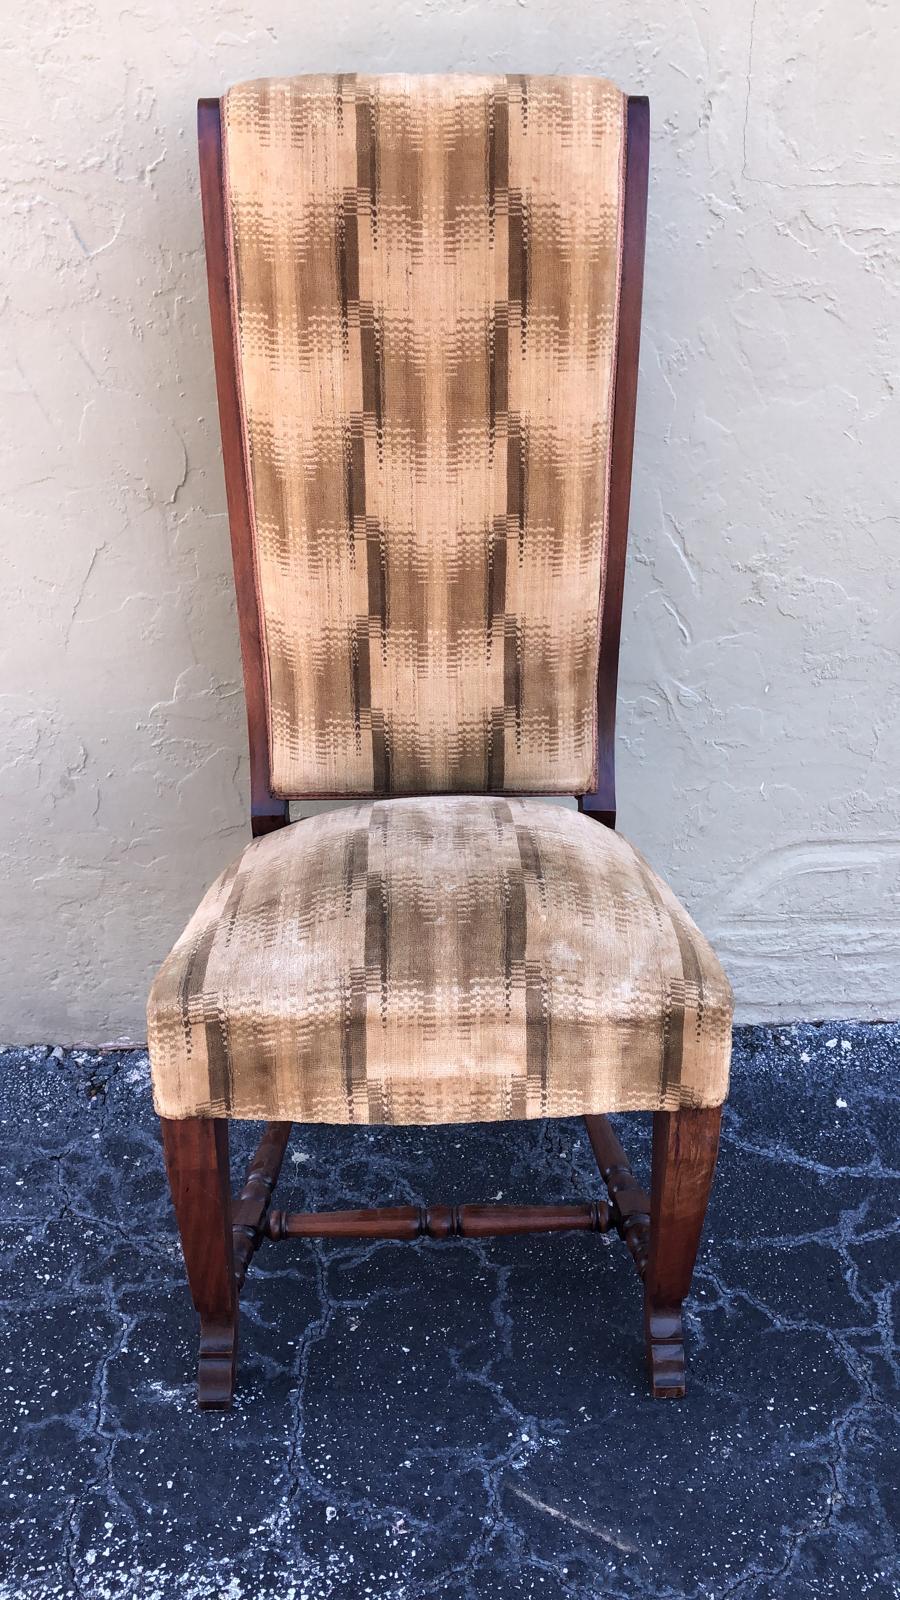 how to reglue wooden chairs